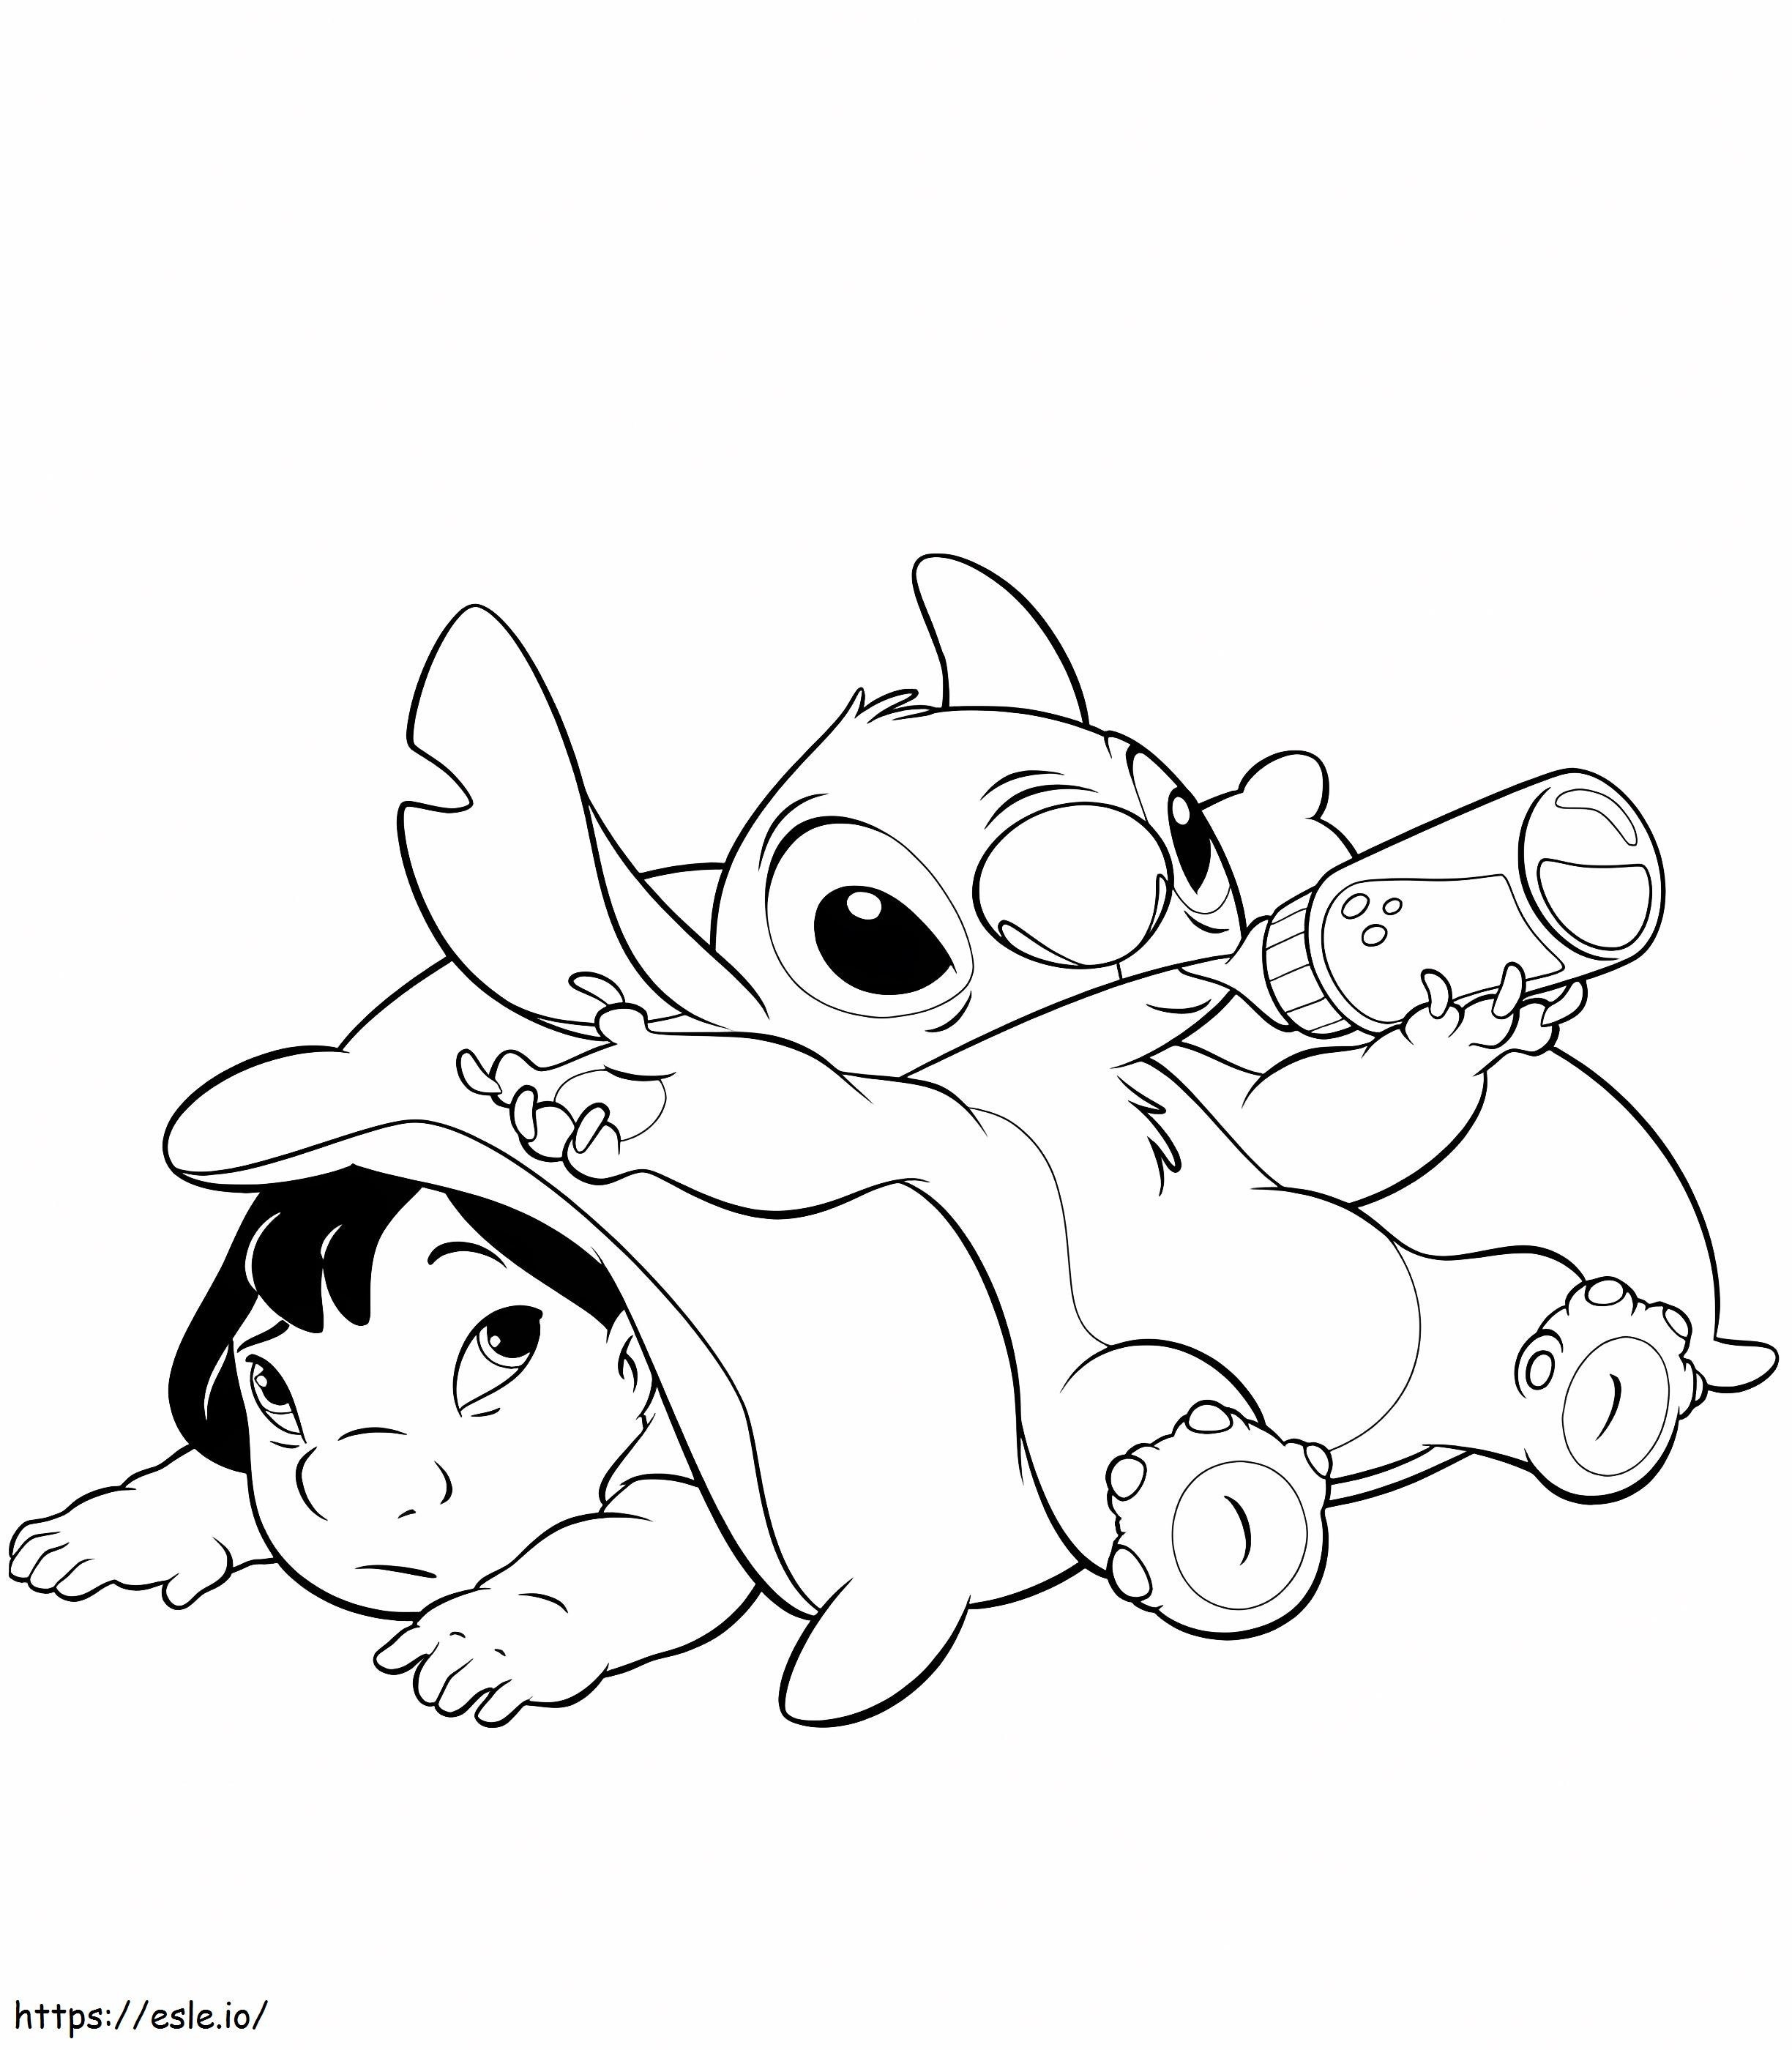 1559978960 Stitch On Lilo A4 coloring page